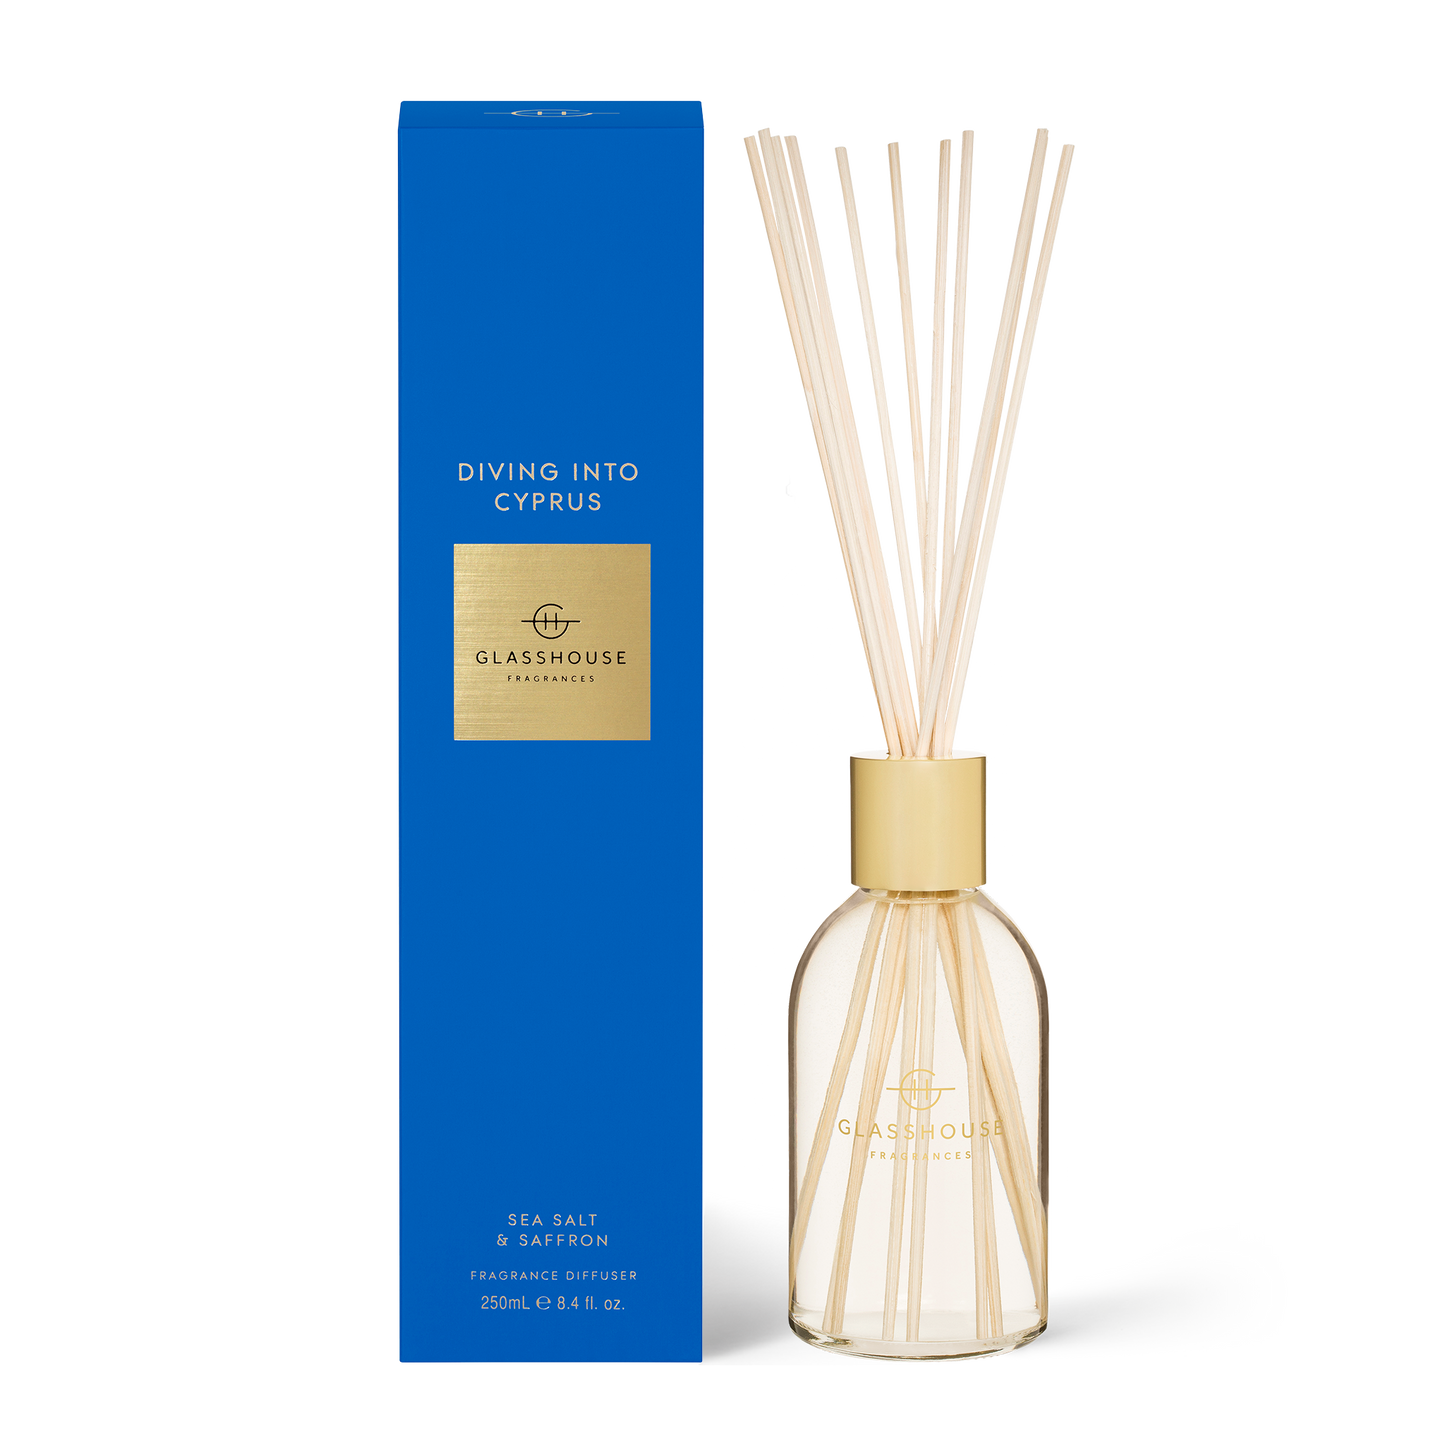 Glasshouse “Diving Into Cyprus” 250ml Fragrance Diffuser